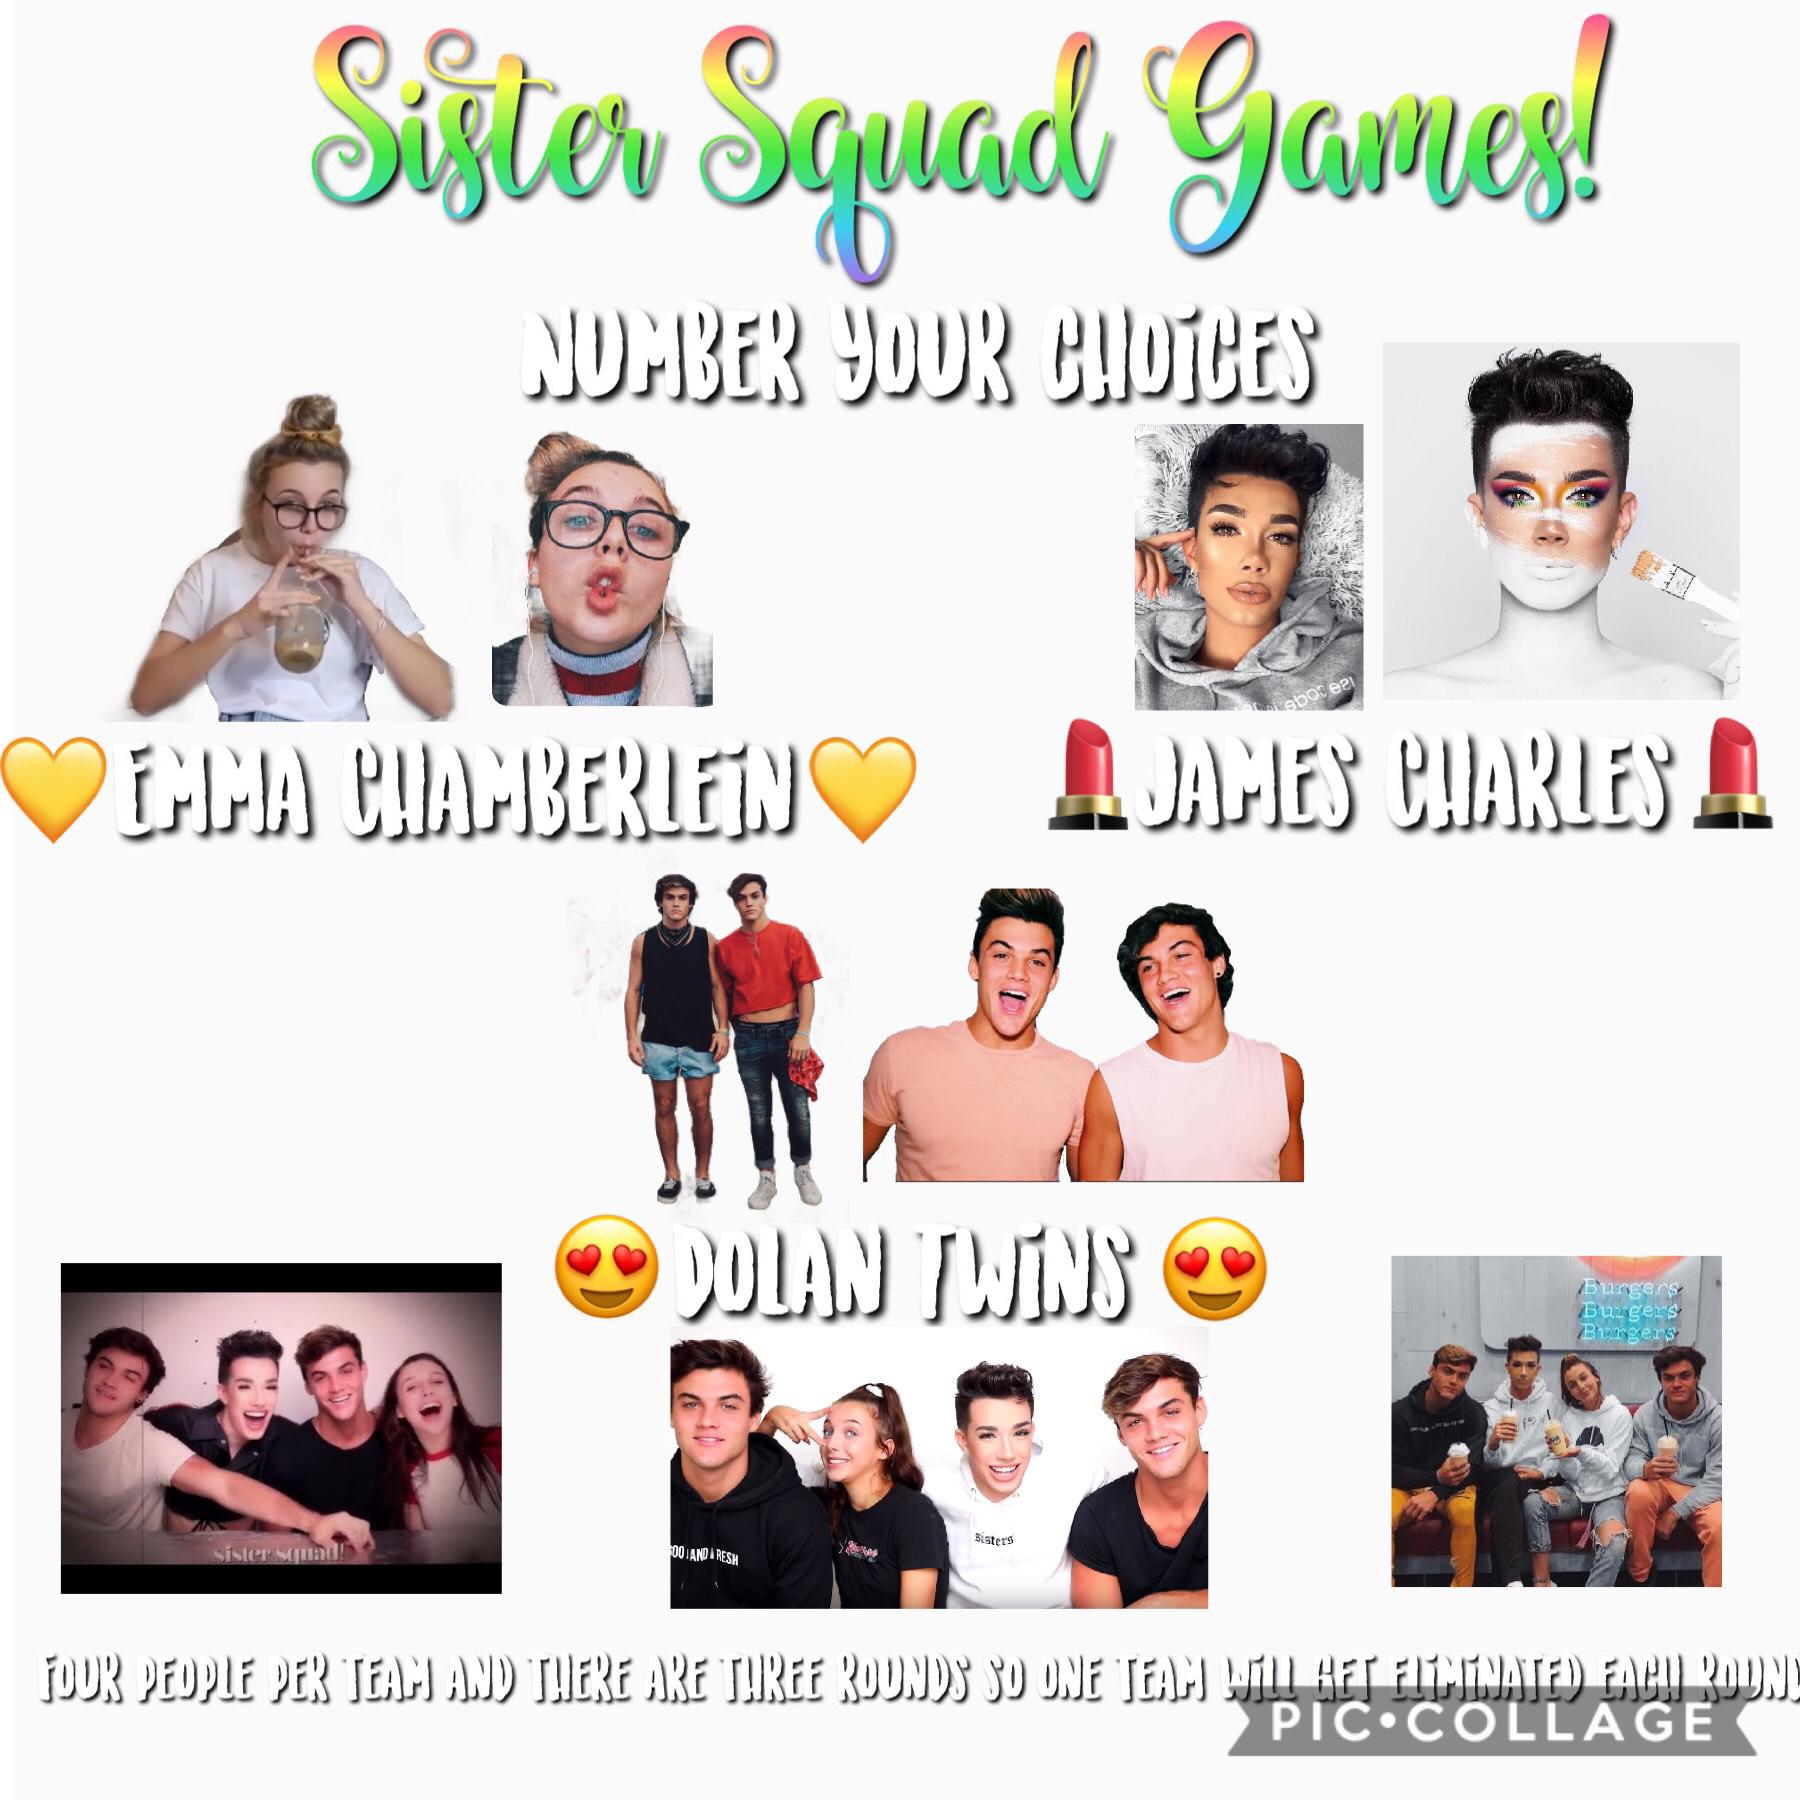 💖Tap!💖
Hi everyone! 😀 I was thinking that games would be fun! 😝 Please join!! I’ll notify you all when there are no more spots on a team. If you have any questions please comment. 💕 ~xoxo Jenna 💜